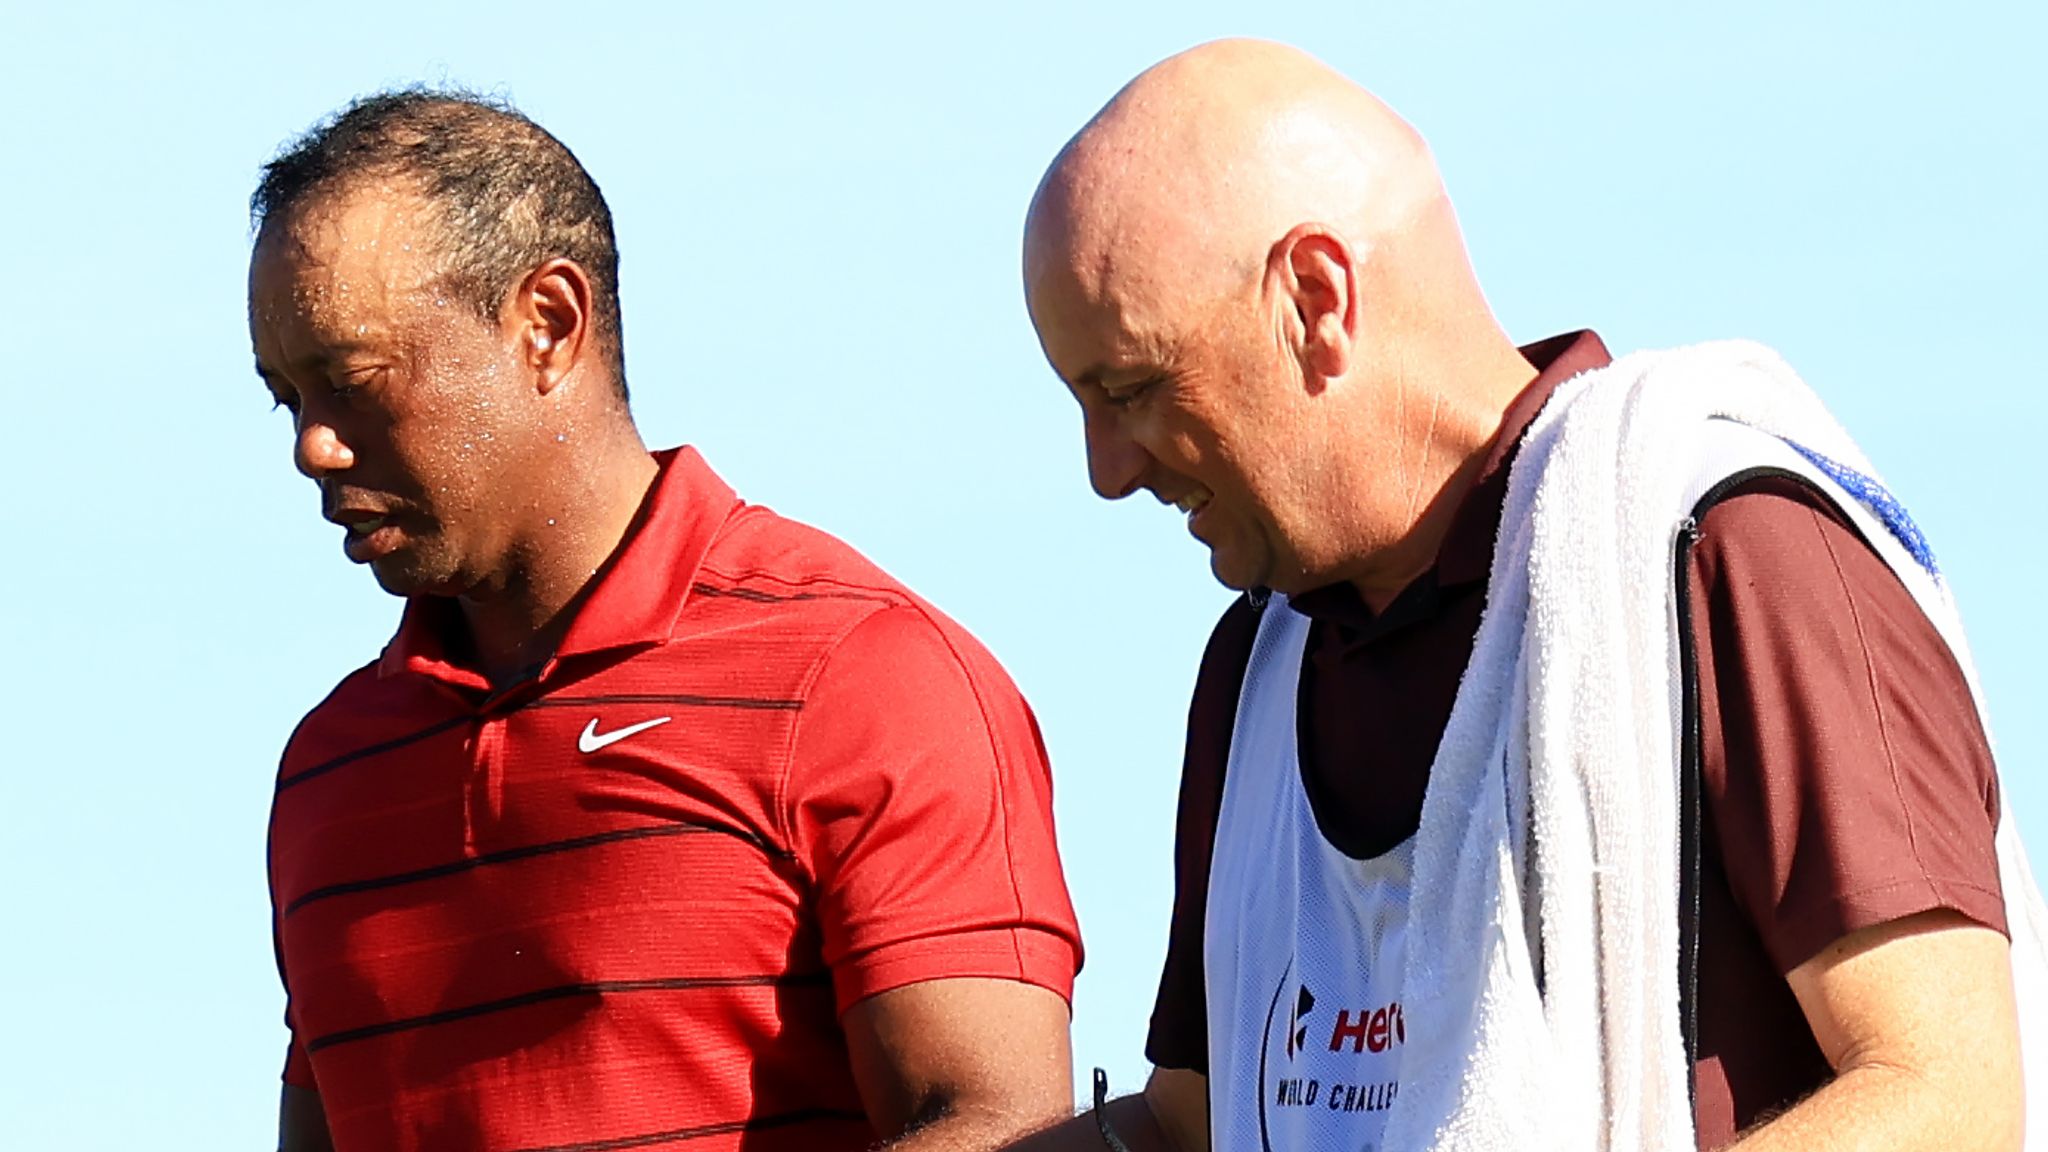 Tiger Woods plans to play for first time since Masters at Hero